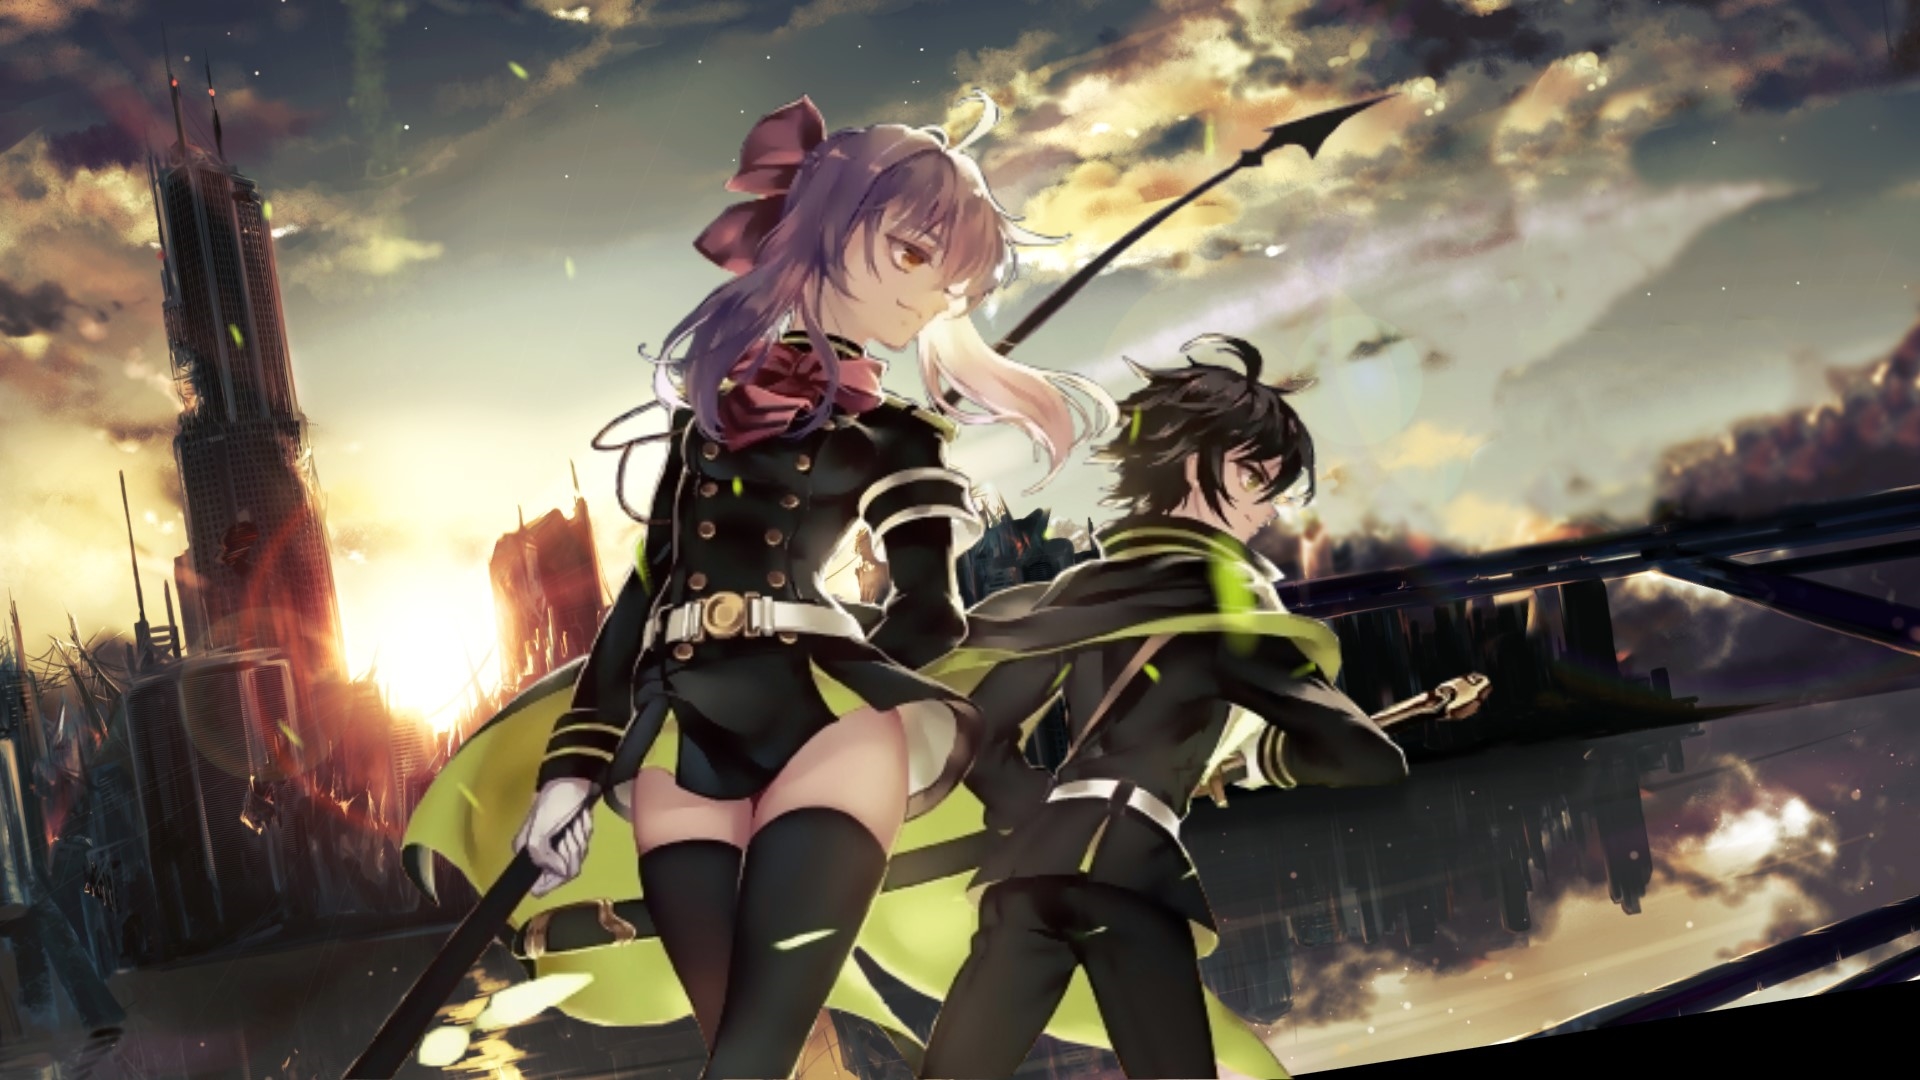 Seraph of the End Images. 